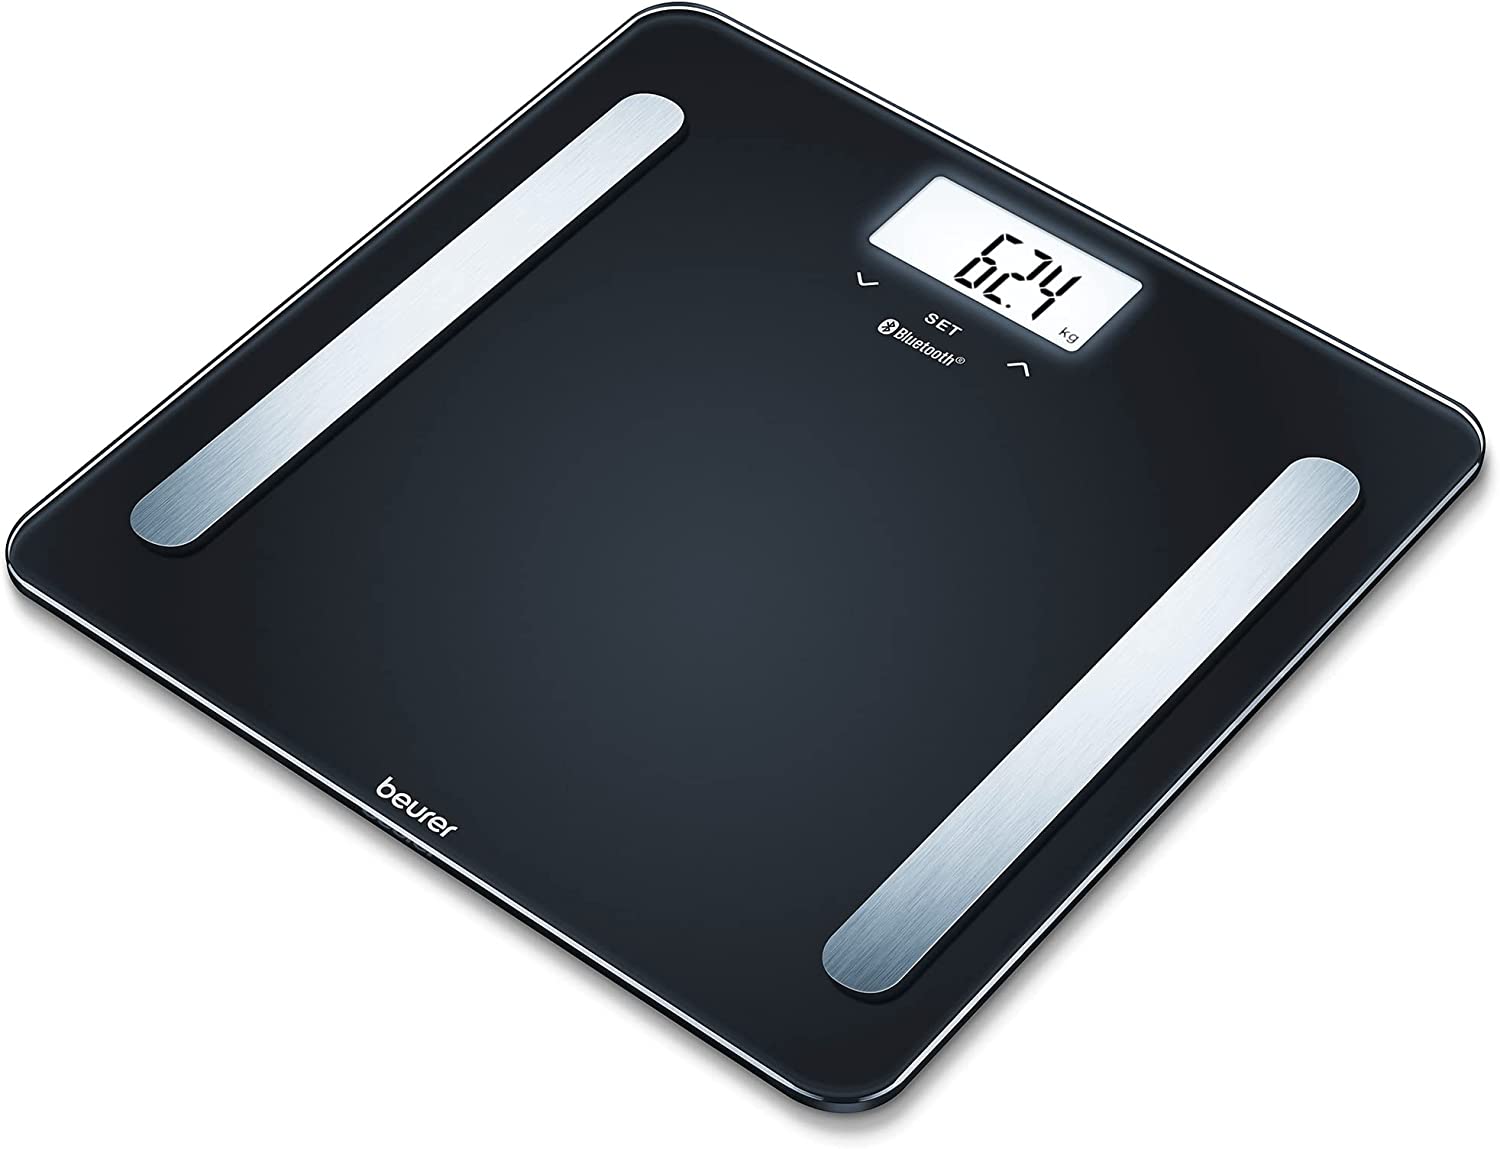 Beurer BF 600 Diagnostic Scales Black for Measuring Body Fat, Body Water, Muscle Content and Bone Mass with App Connection